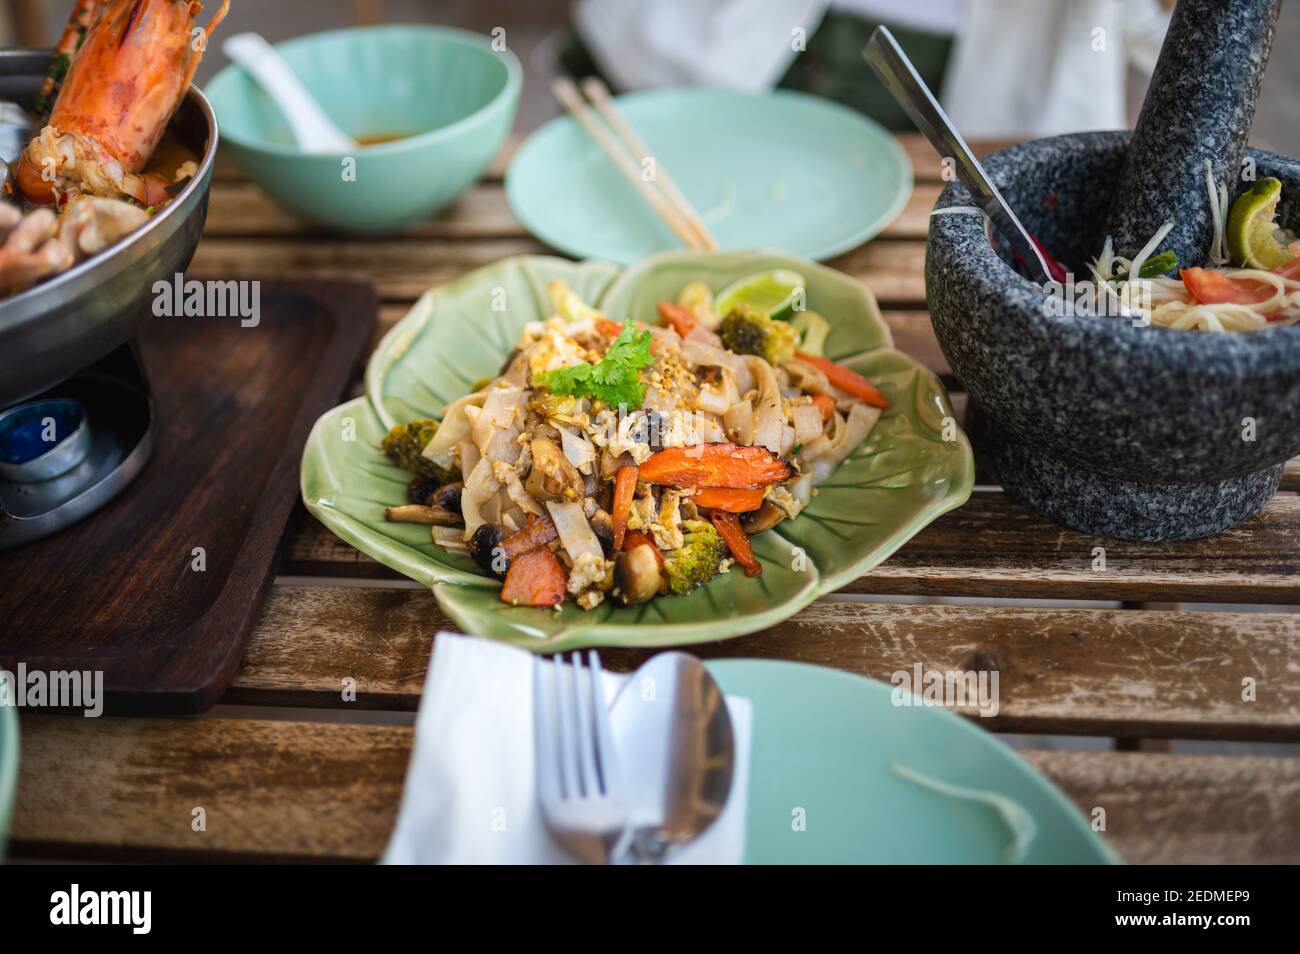 Pad see ew stir fried noodles on a table with Thai food dishes closeup Stock Photo